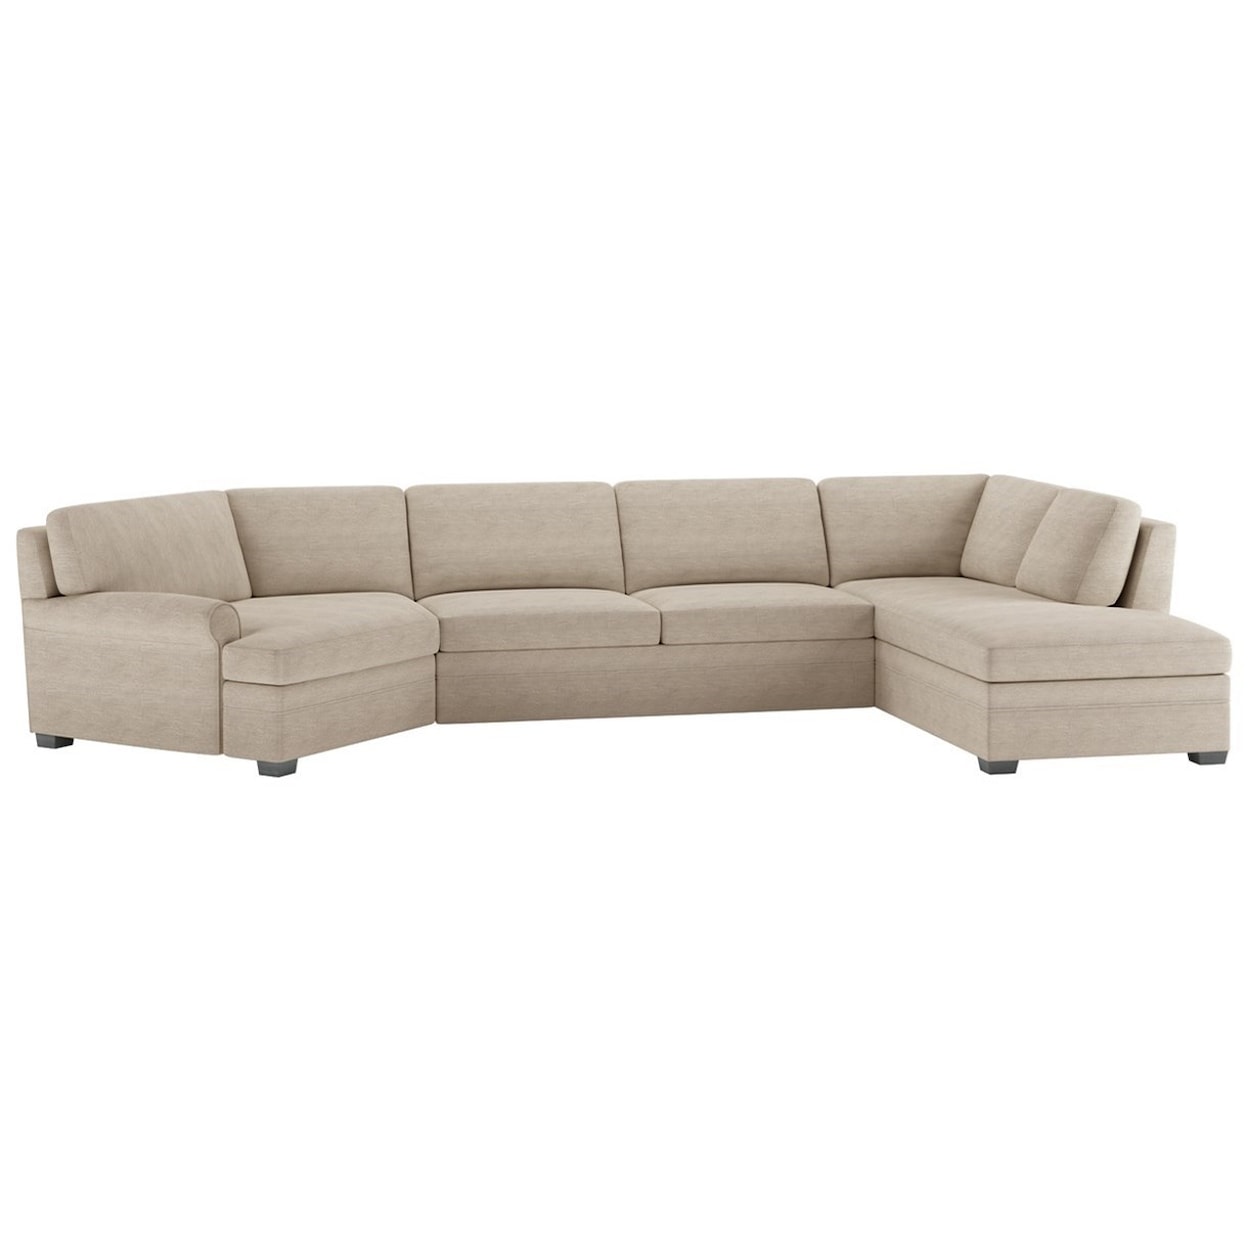 American Leather Gaines 3 Pc Sectional w/ Queen Sleeper & LAS Chaise